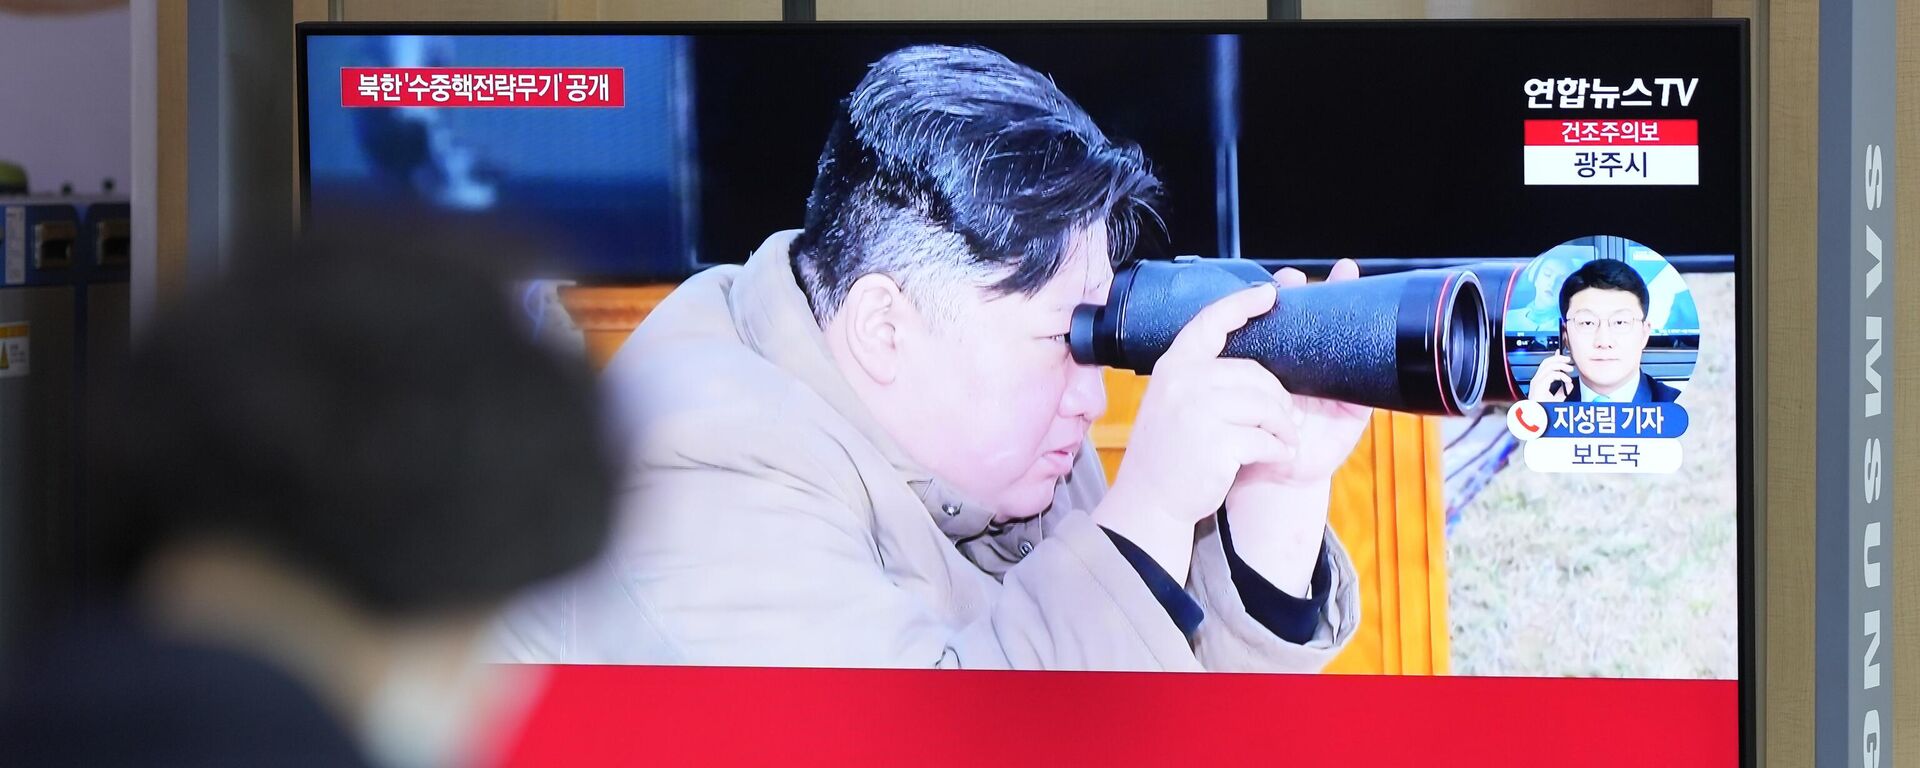 A TV screen shows an image of North Korean leader Kim Jong Un during a news program at the Seoul Railway Station in Seoul, South Korea, Friday, March 24, 2023. North Korea said Friday its latest cruise missile launches this week were part of nuclear attack simulations that also involved a test of a purported underwater attack drone as leader Kim Jong Un vowed to make his rivals plunge into despair. - Sputnik International, 1920, 12.09.2023